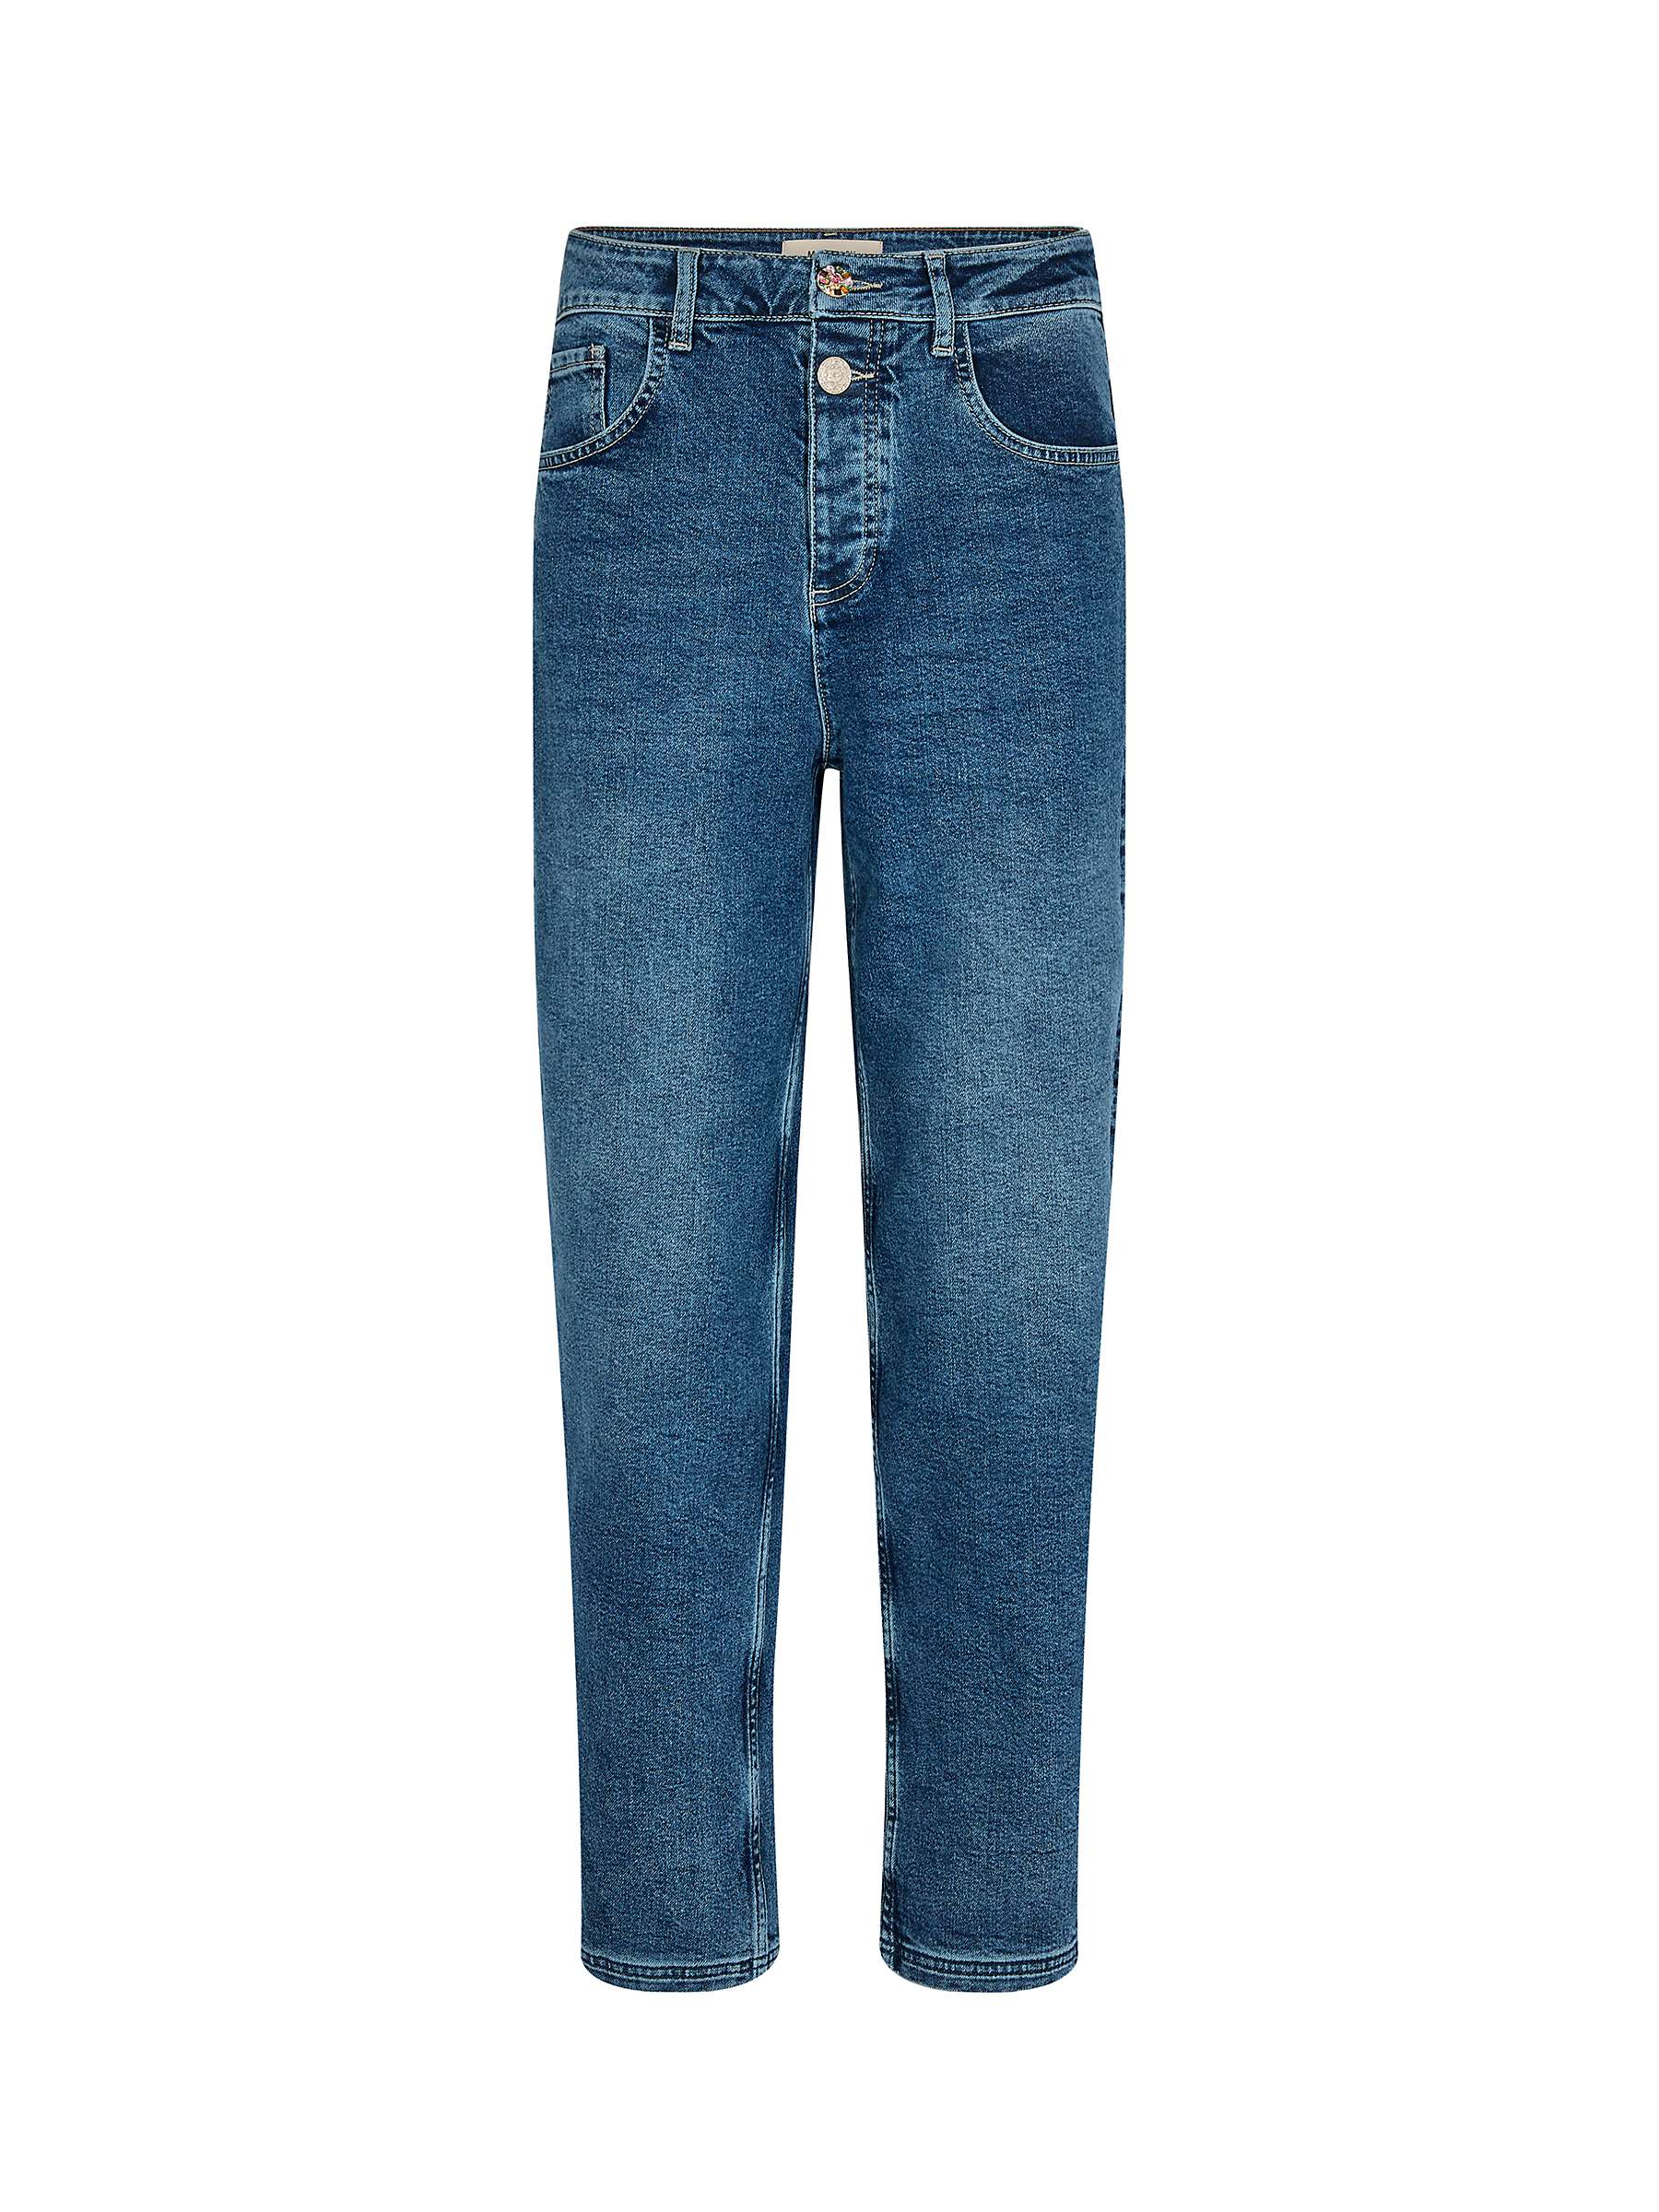 Buy MOS MOSH Adeline Sia Mom Fit Jeans, Blue Online at johnlewis.com